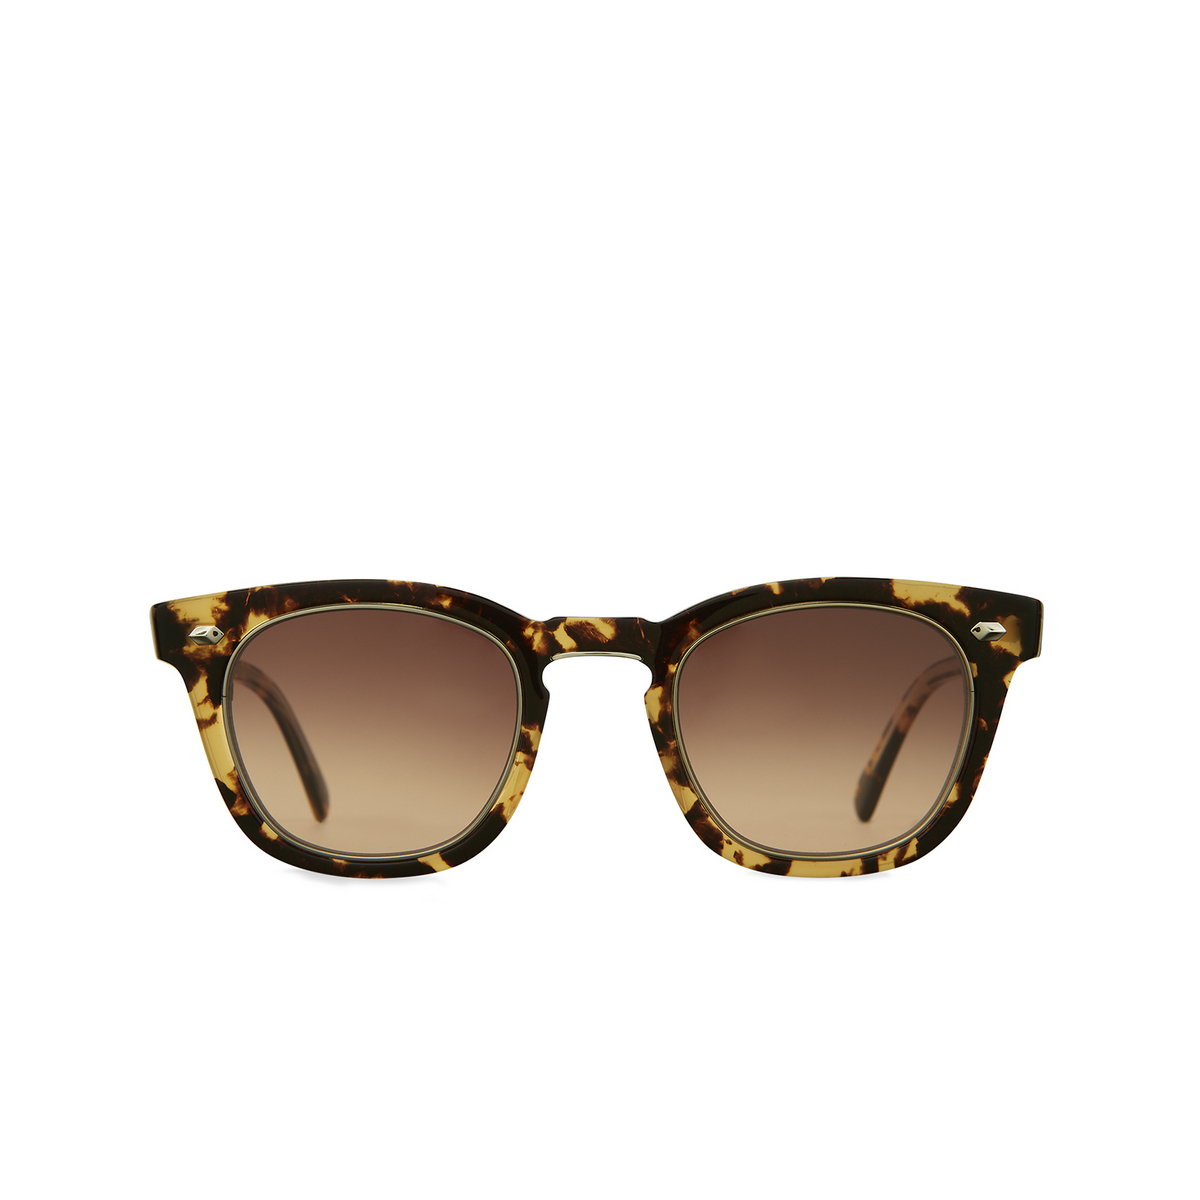 Mr. Leight HANALEI S Sunglasses BOHO-12KG/WITH Bohemian Tortoise - 12k White Gold - front view